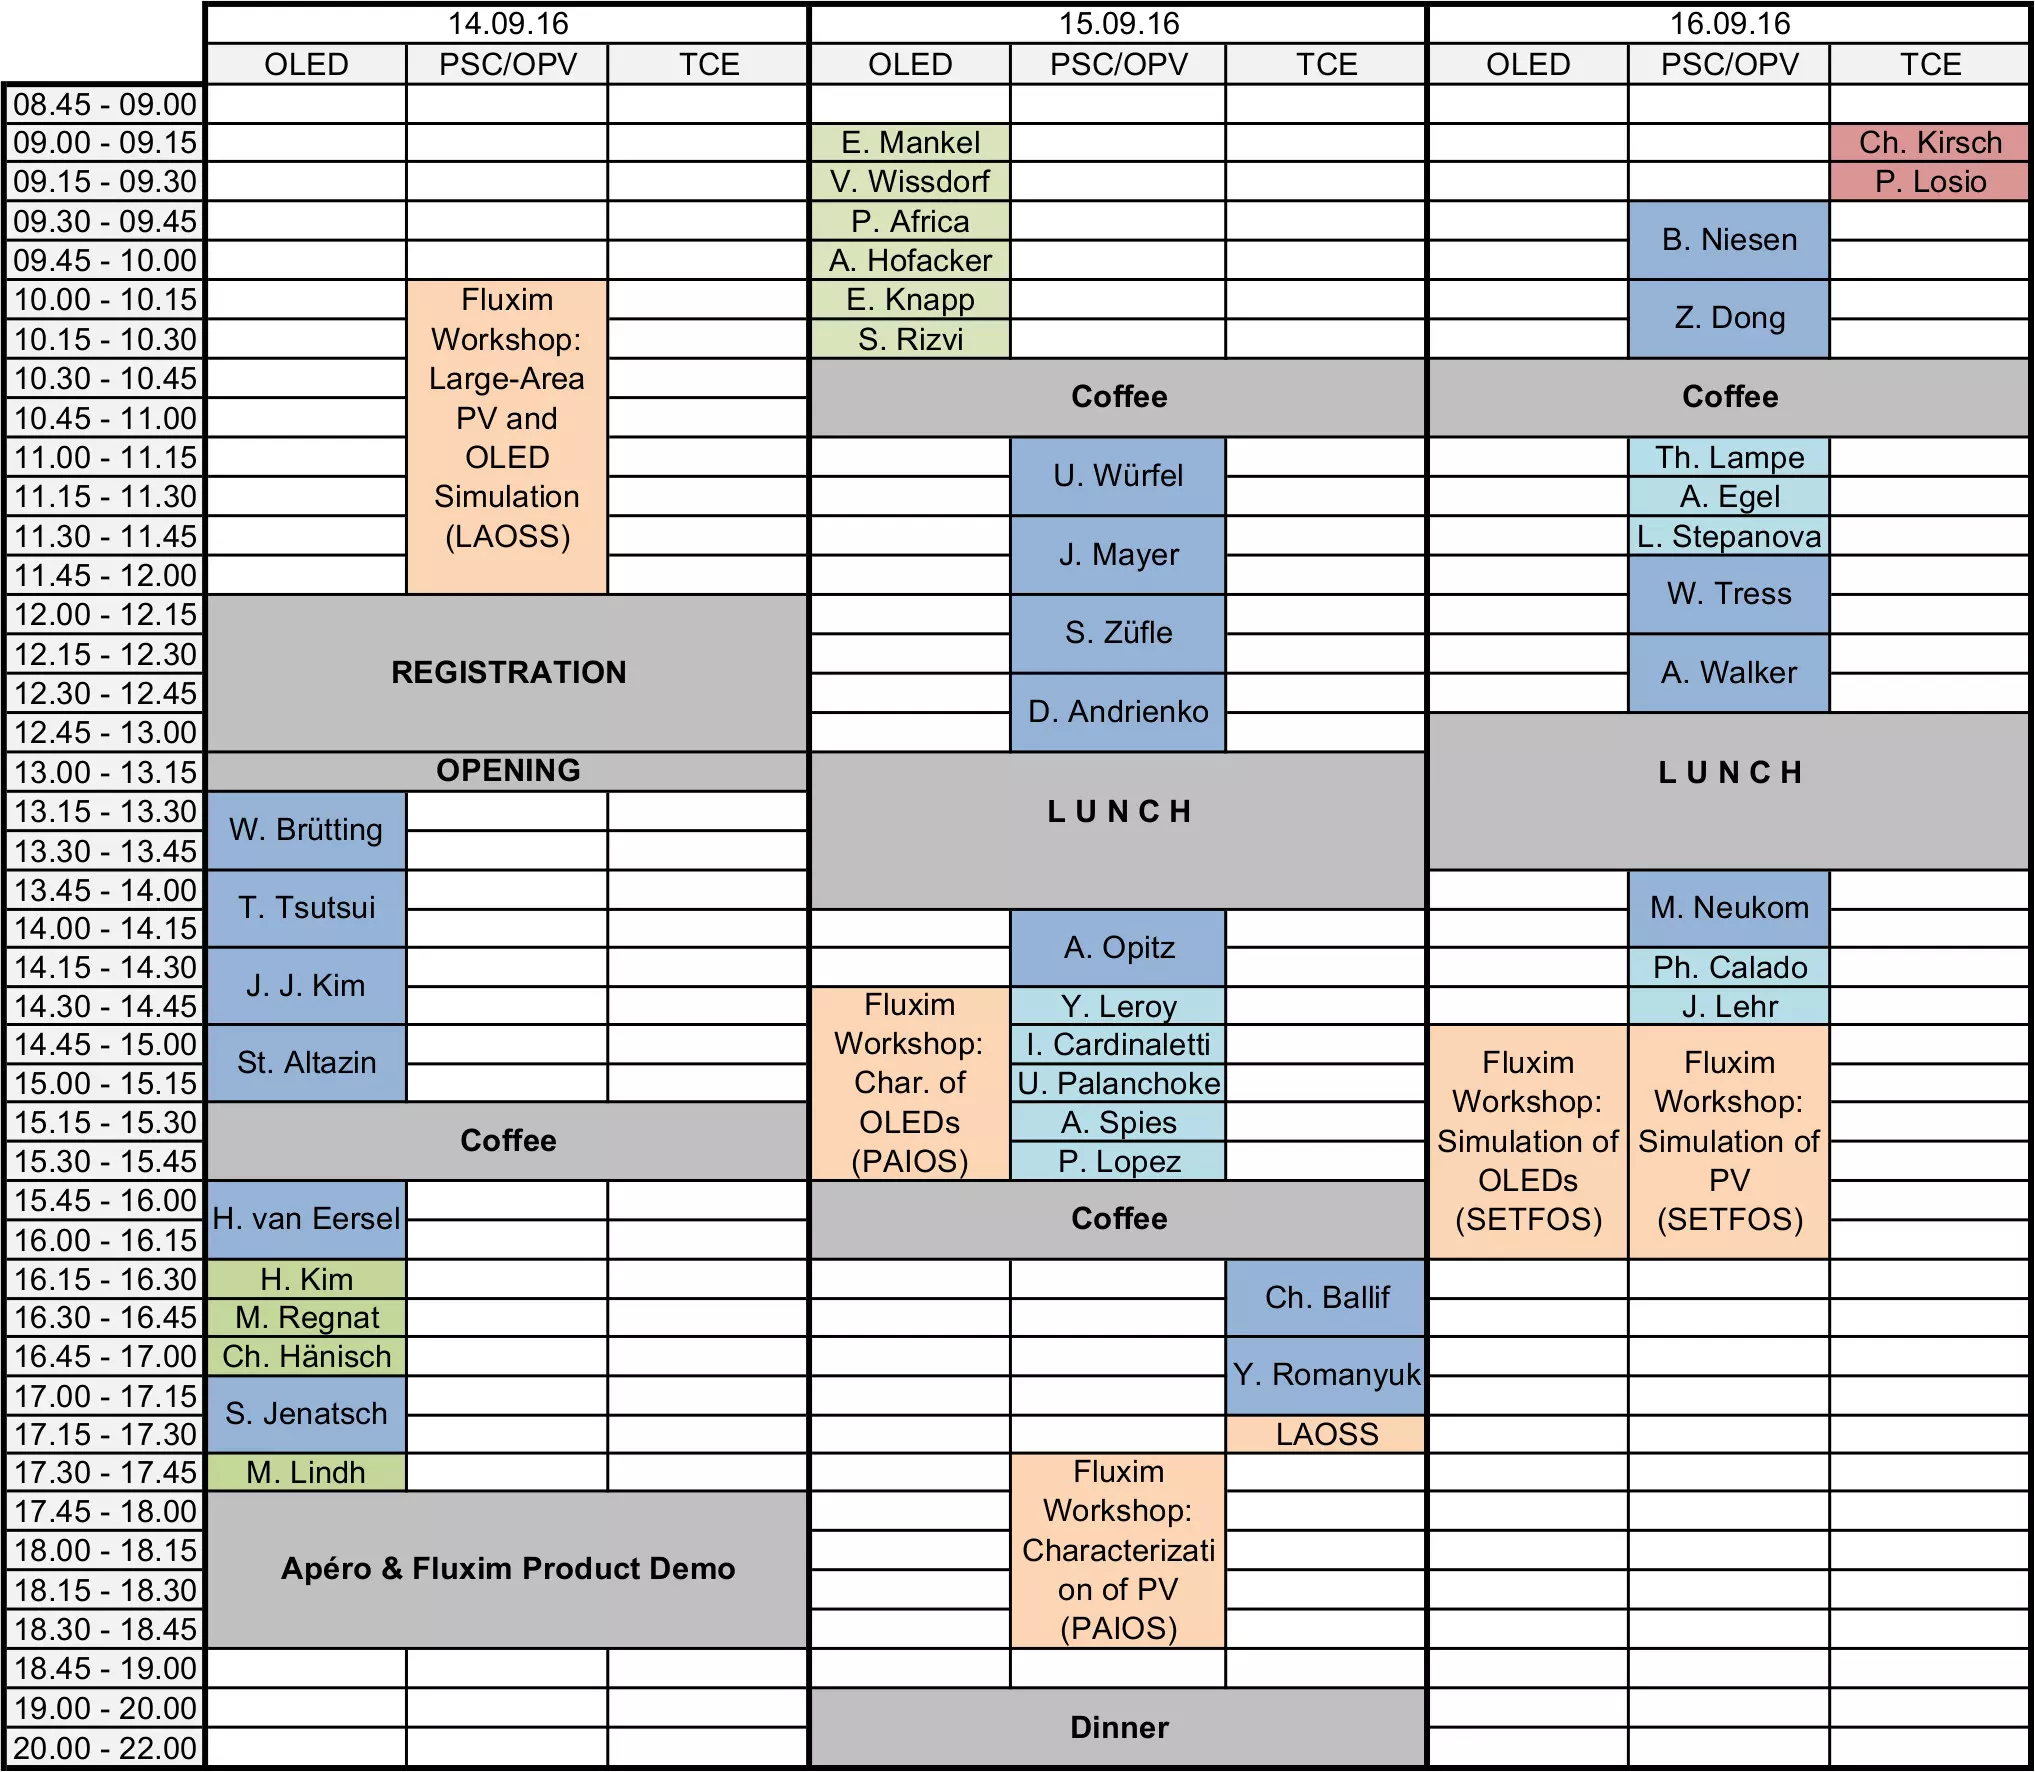 The picture shows an Excel Table with the detailled program at every hour during the conference days.